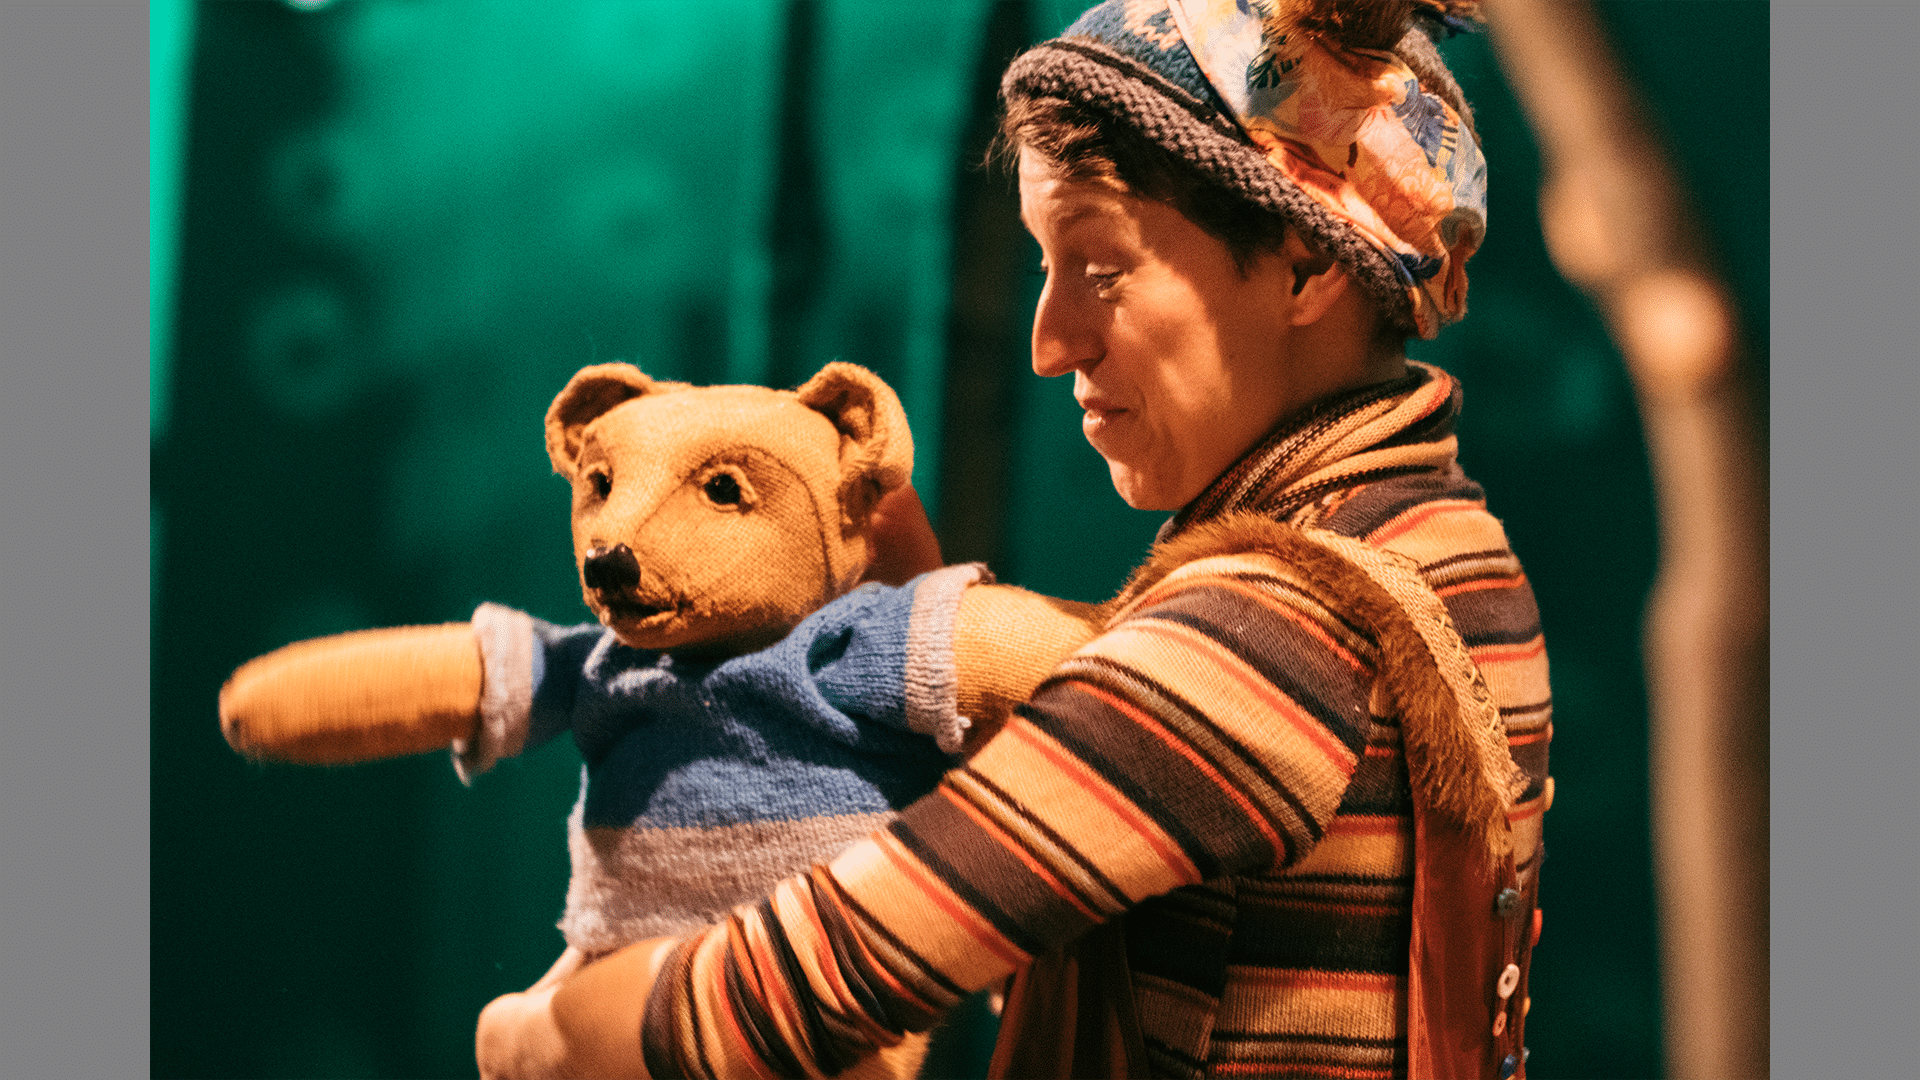 A performer stands on stage holding a baby bear puppet, they look at it happily.